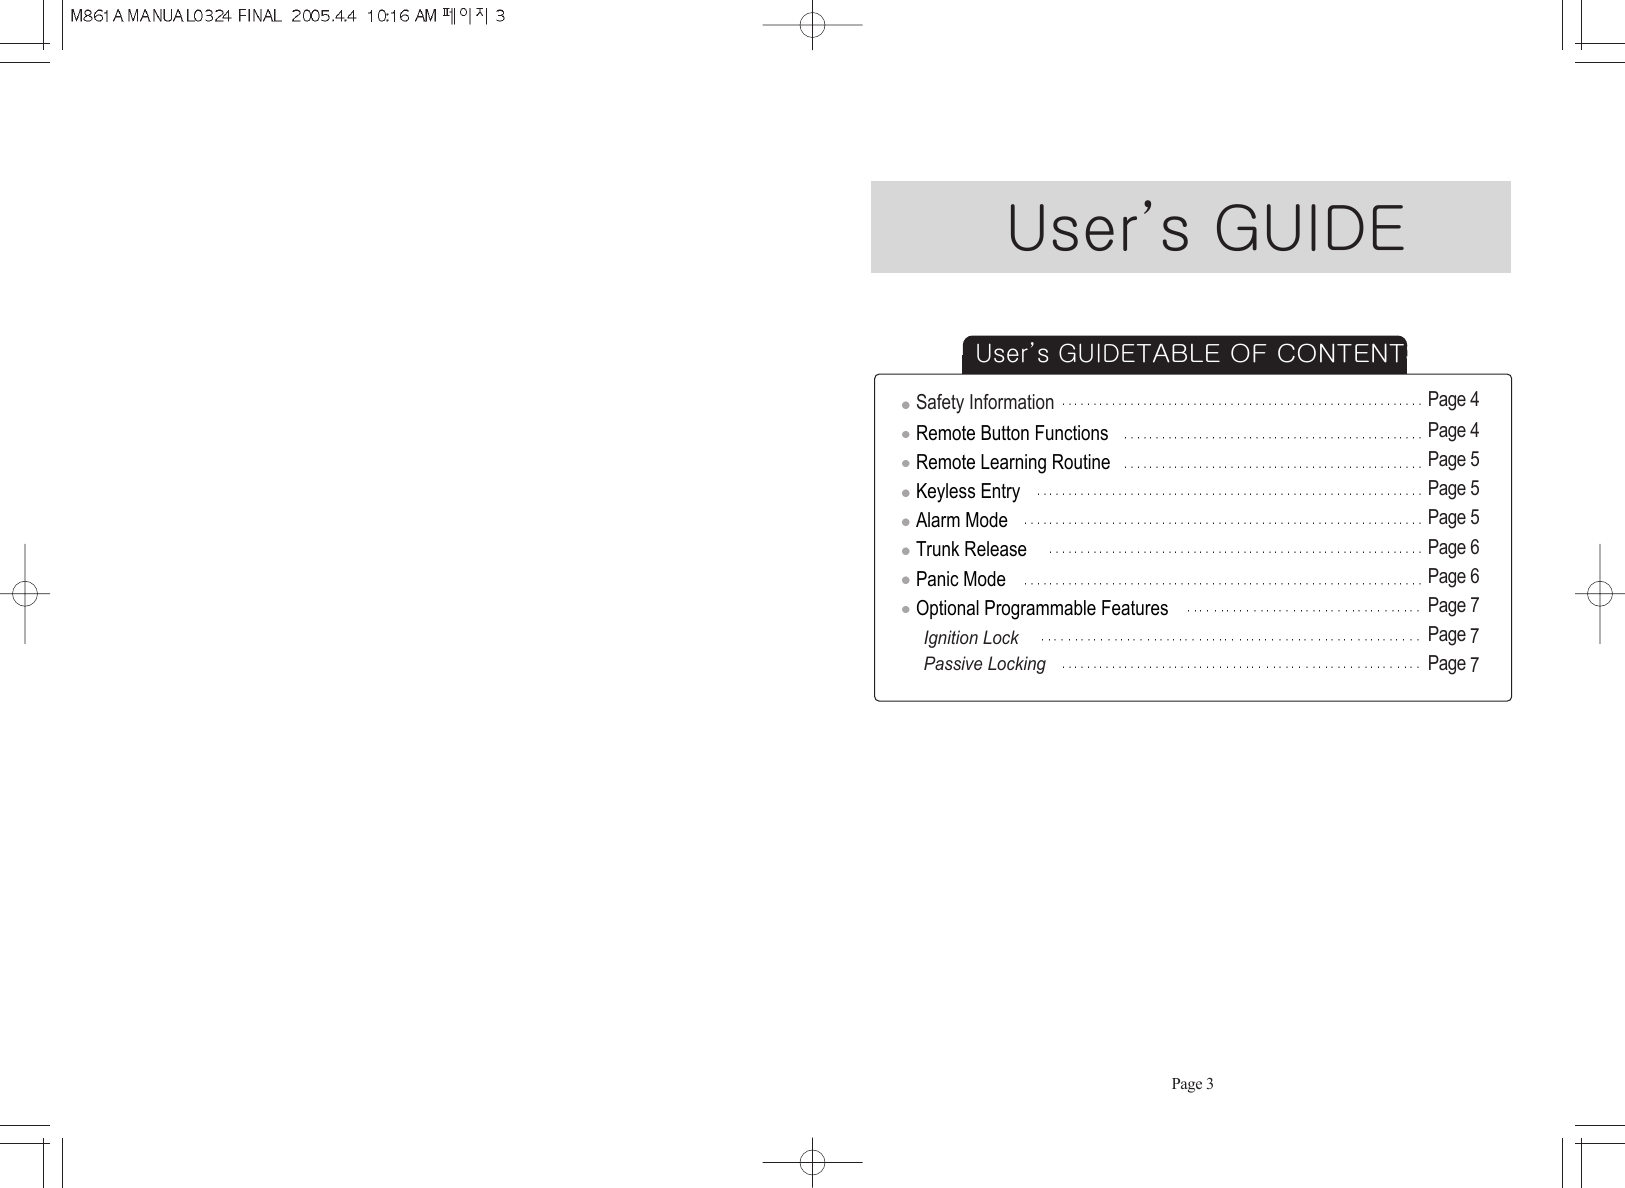 User’s GUIDE TABLE OF CONTENTSSafety InformationRemote Button FunctionsRemote Learning RoutineKeyless EntryAlarm ModeTrunk ReleasePanic ModeOptional Programmable FeaturesIgnition LockPassive LockingPage 4Page 4Page 5Page 5Page 5Page 6Page 6Page 7Page 7Page 7Page 3User’s GUIDE